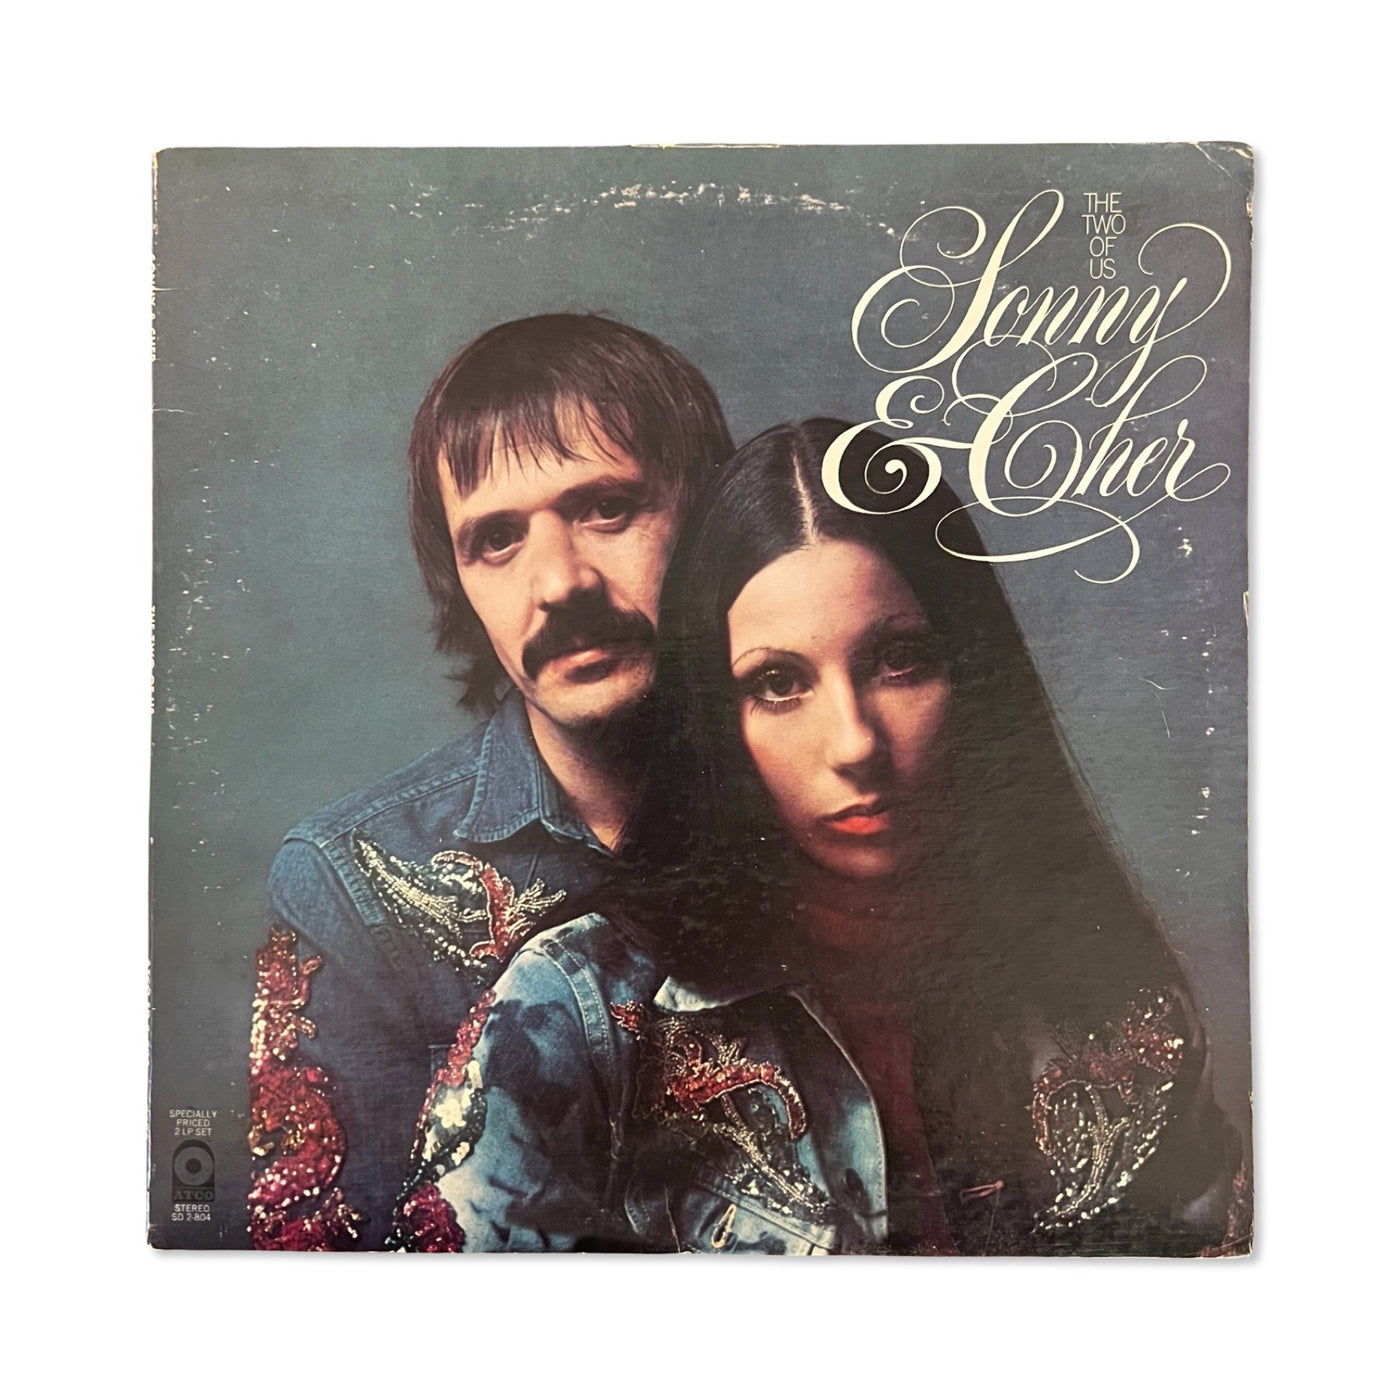 Sonny & Cher – The Two Of Us